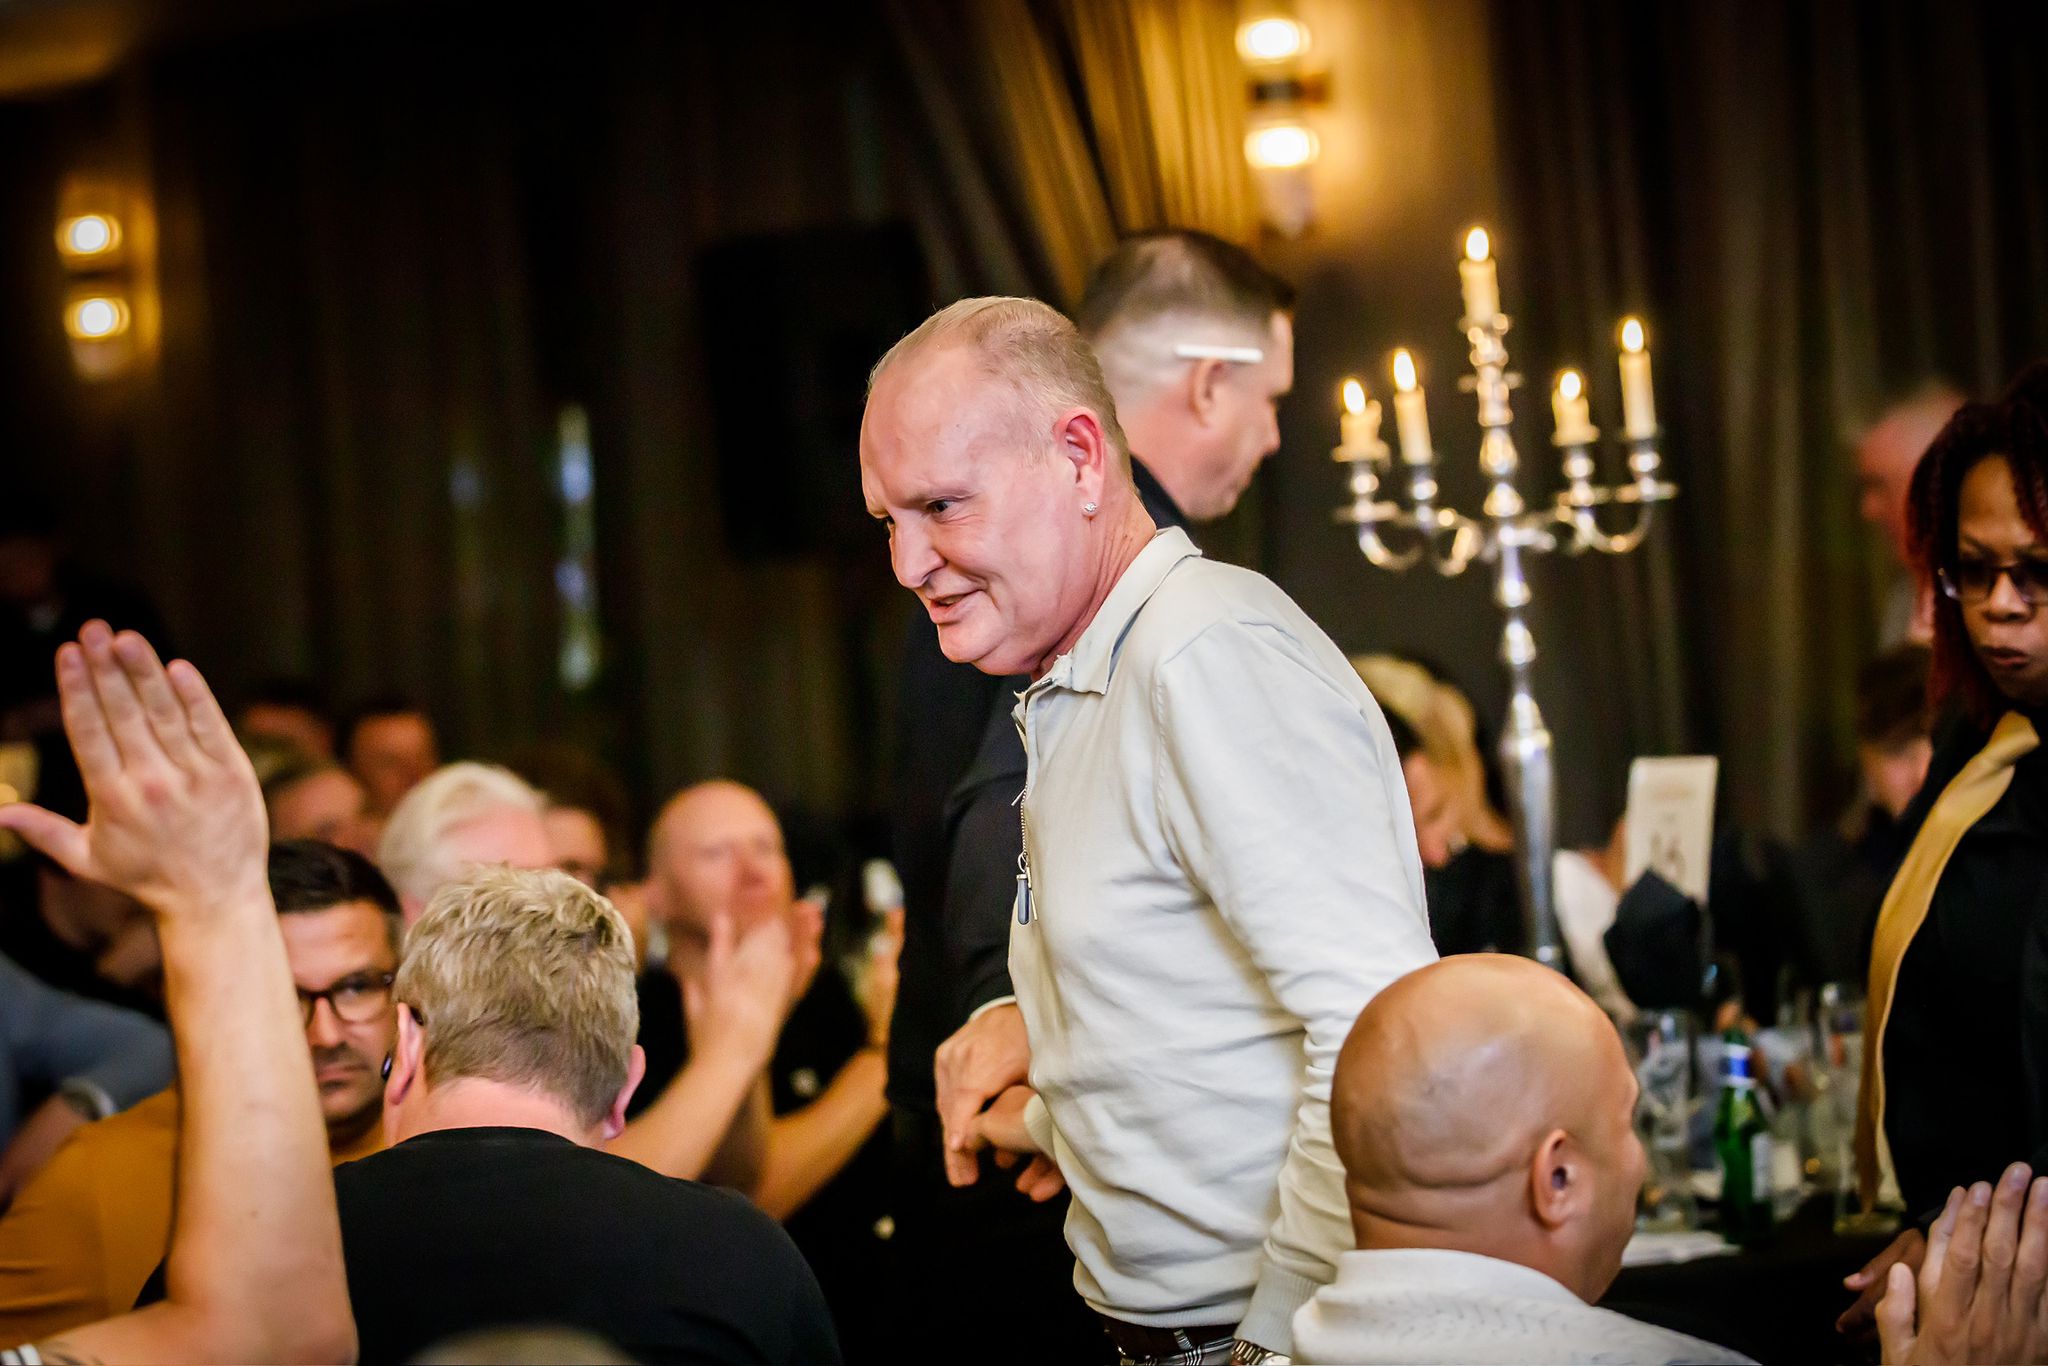 Paul Gascoigne was the guest of honour at An Evening With Gazza at the Grand in Southport. Photo by Kevin Brown Photography